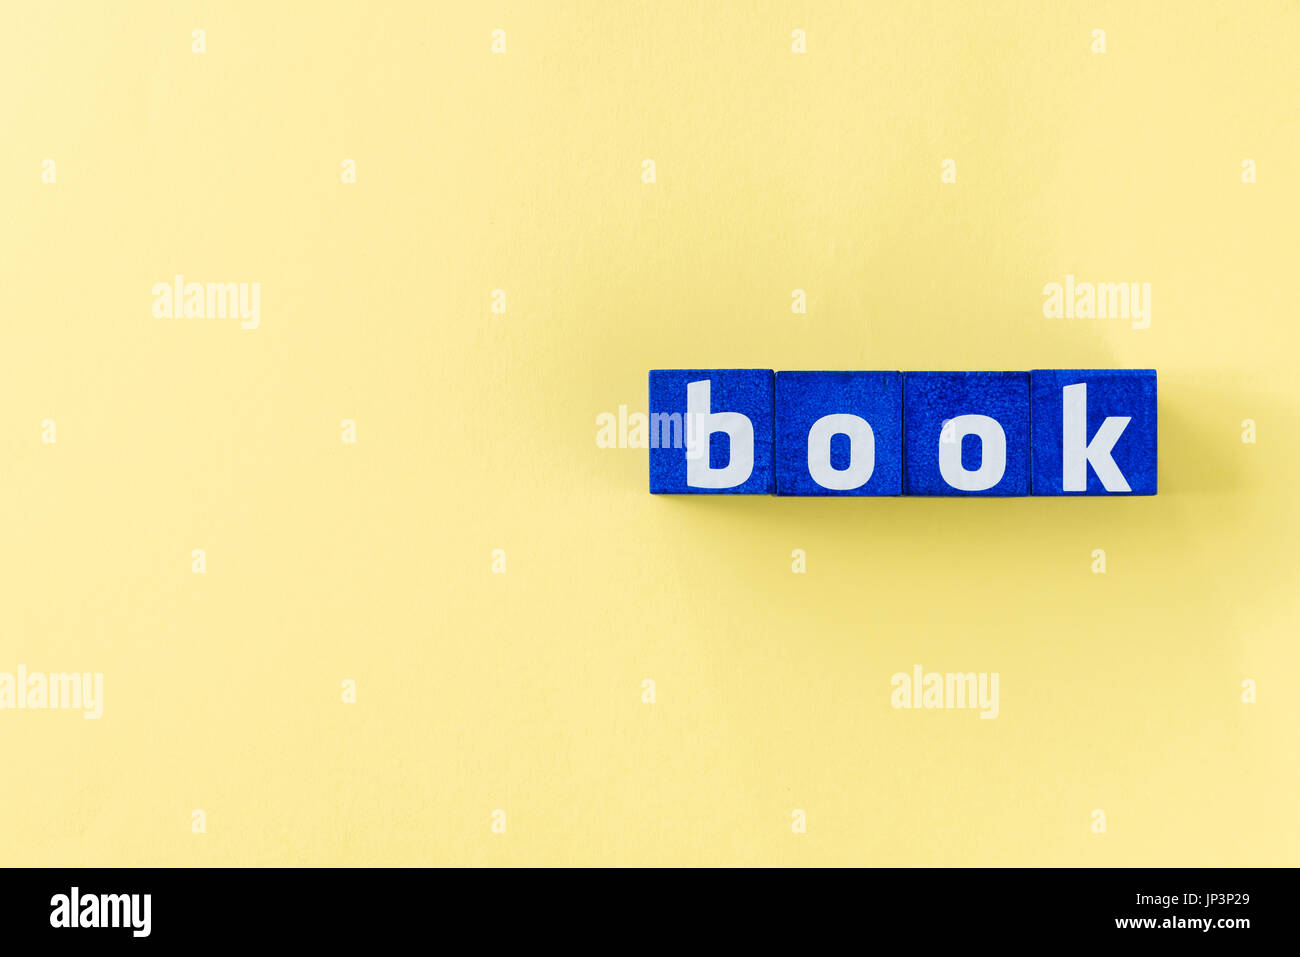 book word made from blue cubes on yellow surface Stock Photo